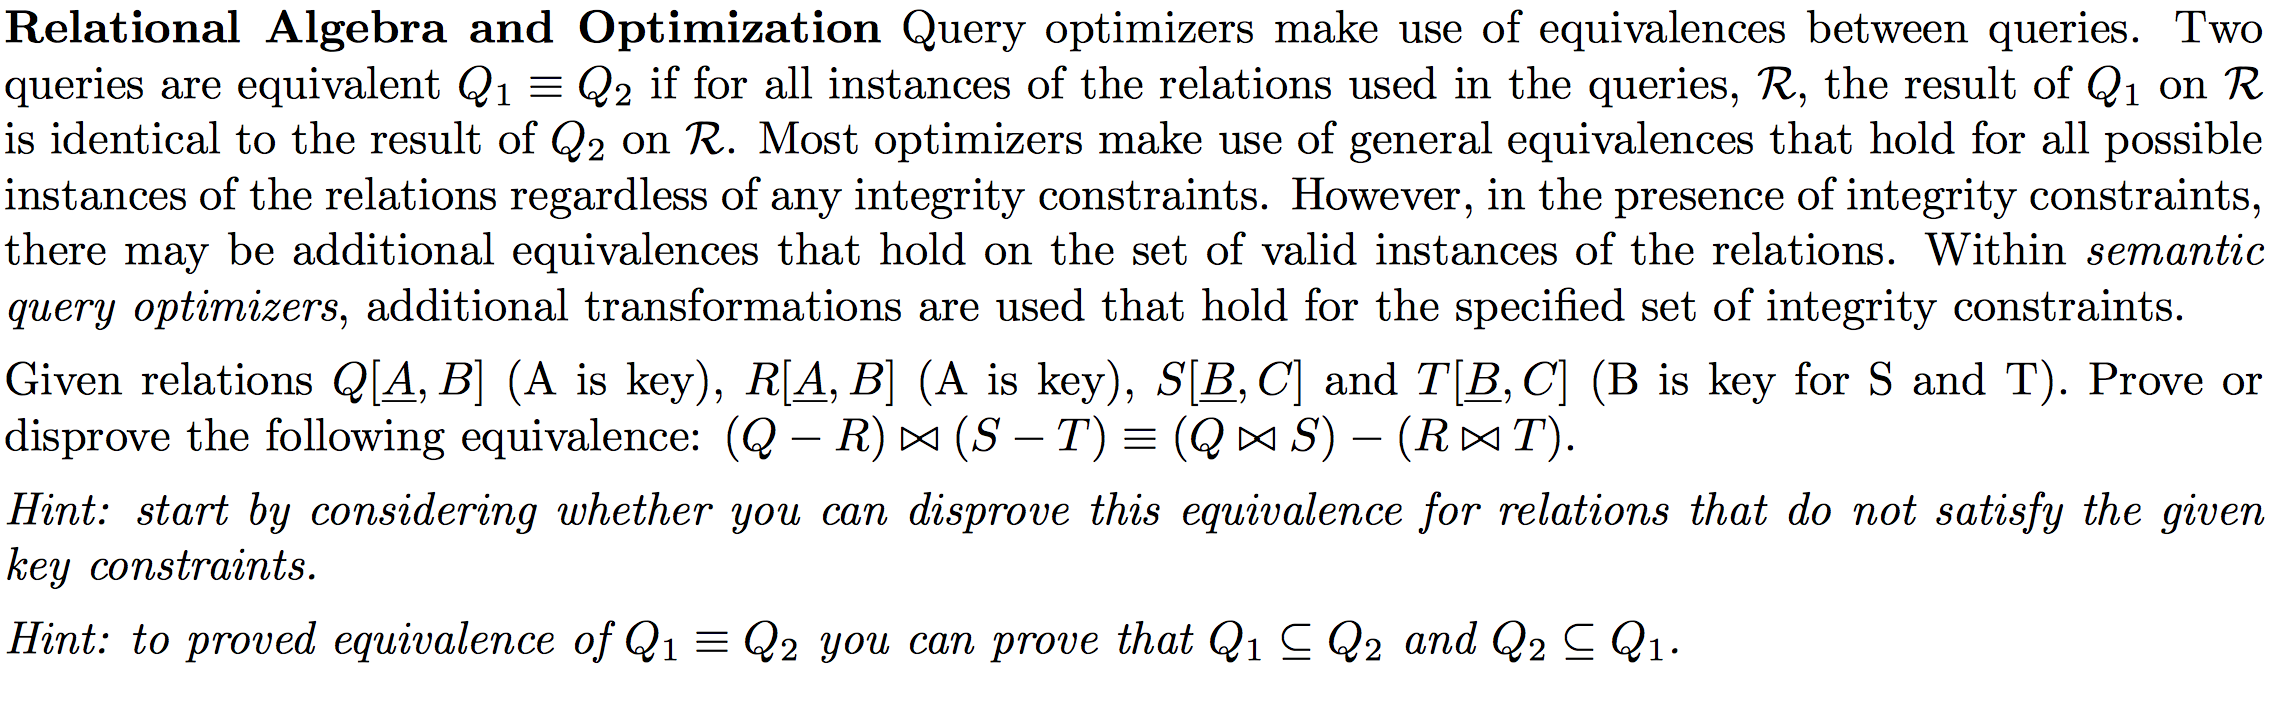 Relational Algebra and Optimization Query optimizers make use of equivalences between queries. Two queries are equivalent Q1